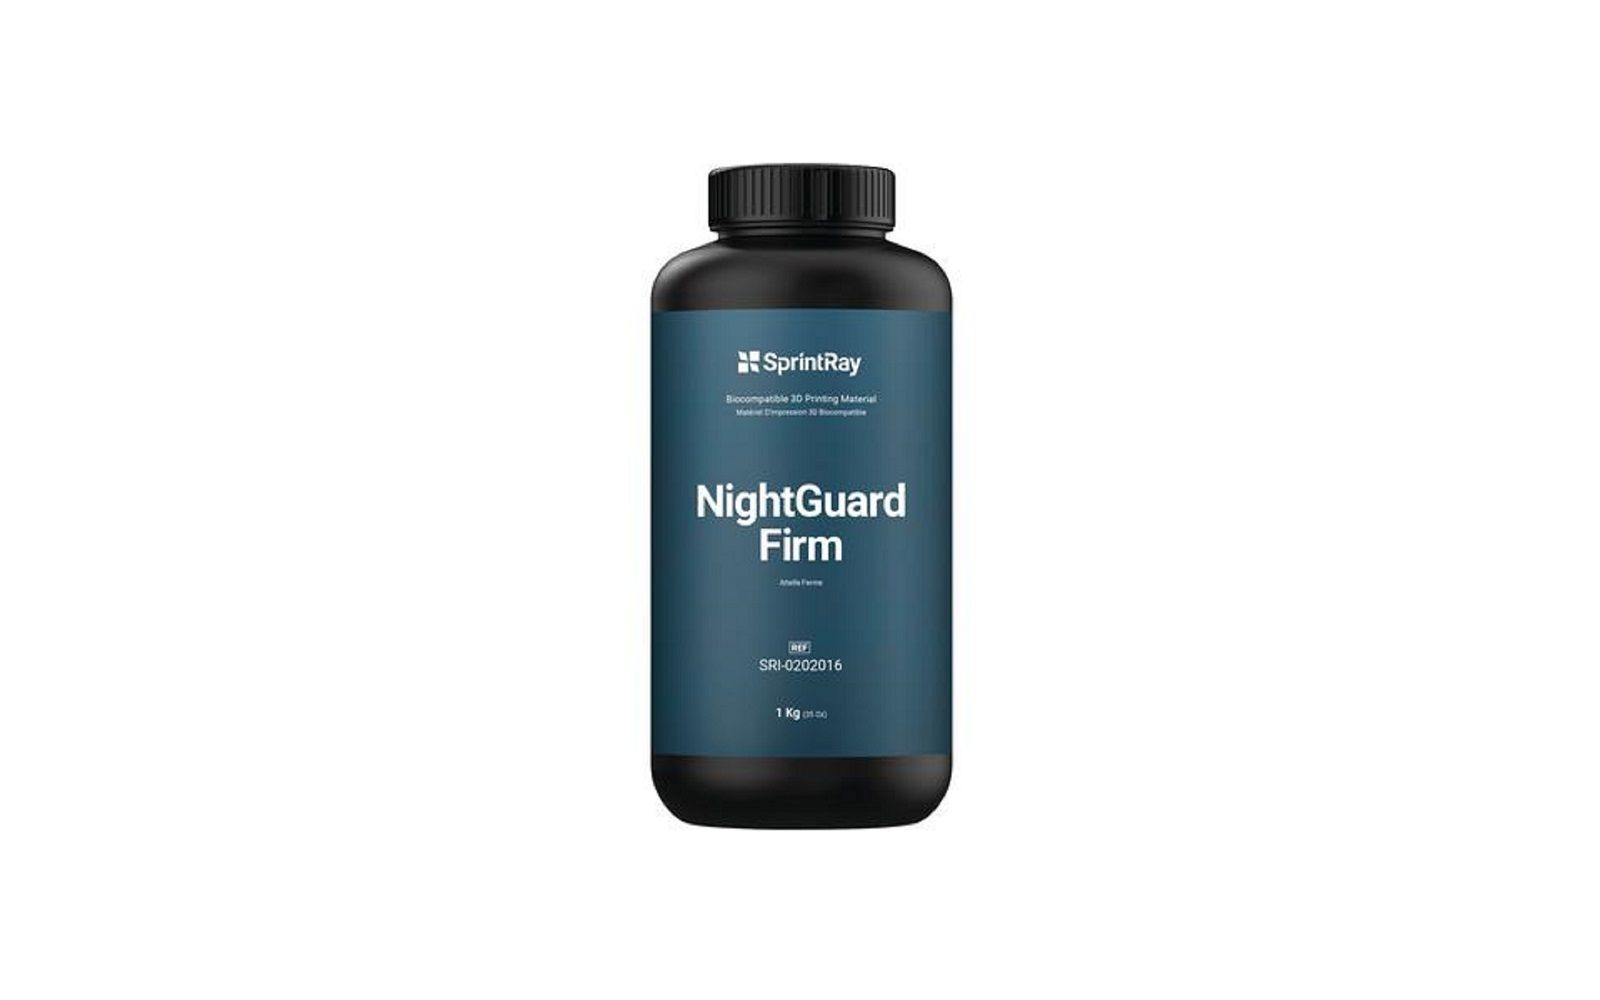 Sprintray nightguard firm biocompatible 3d printing material, 1 kg bottle